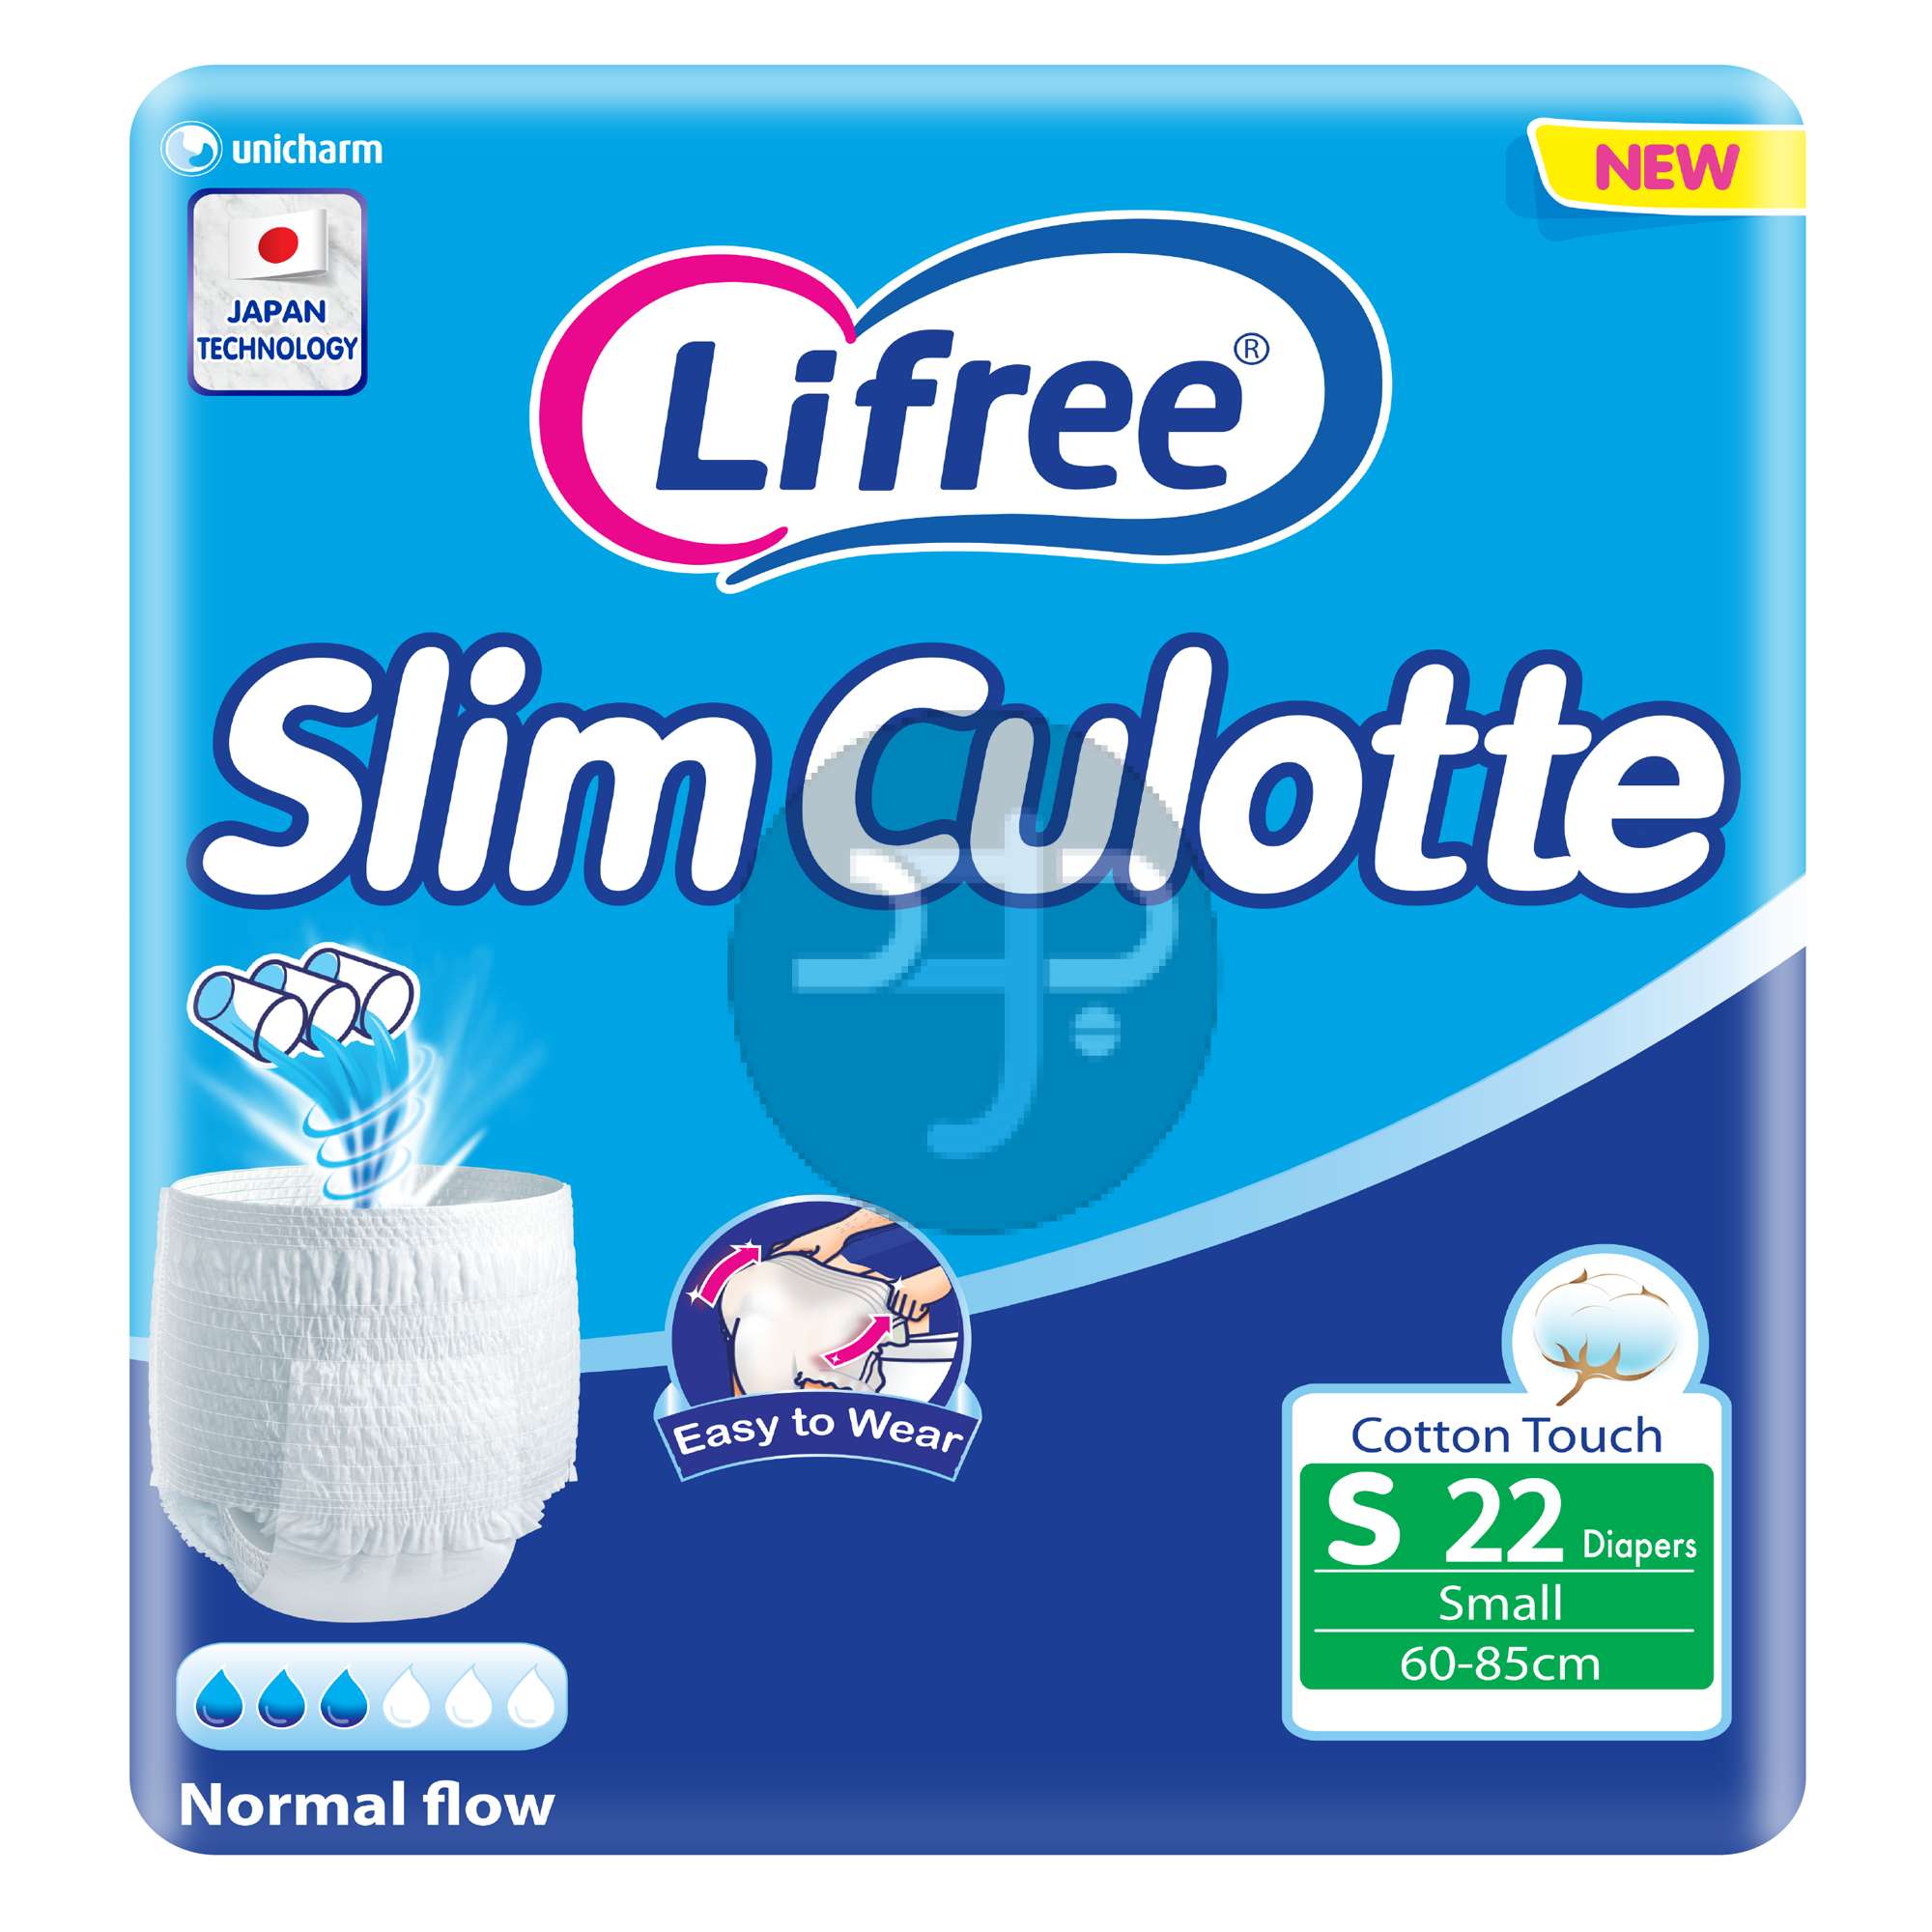 Product-Lifree Slim Culotte Adult Diaper Pants, Small Size, 3 Cup Absorbency , Jumbo Pack, 22 Pieces